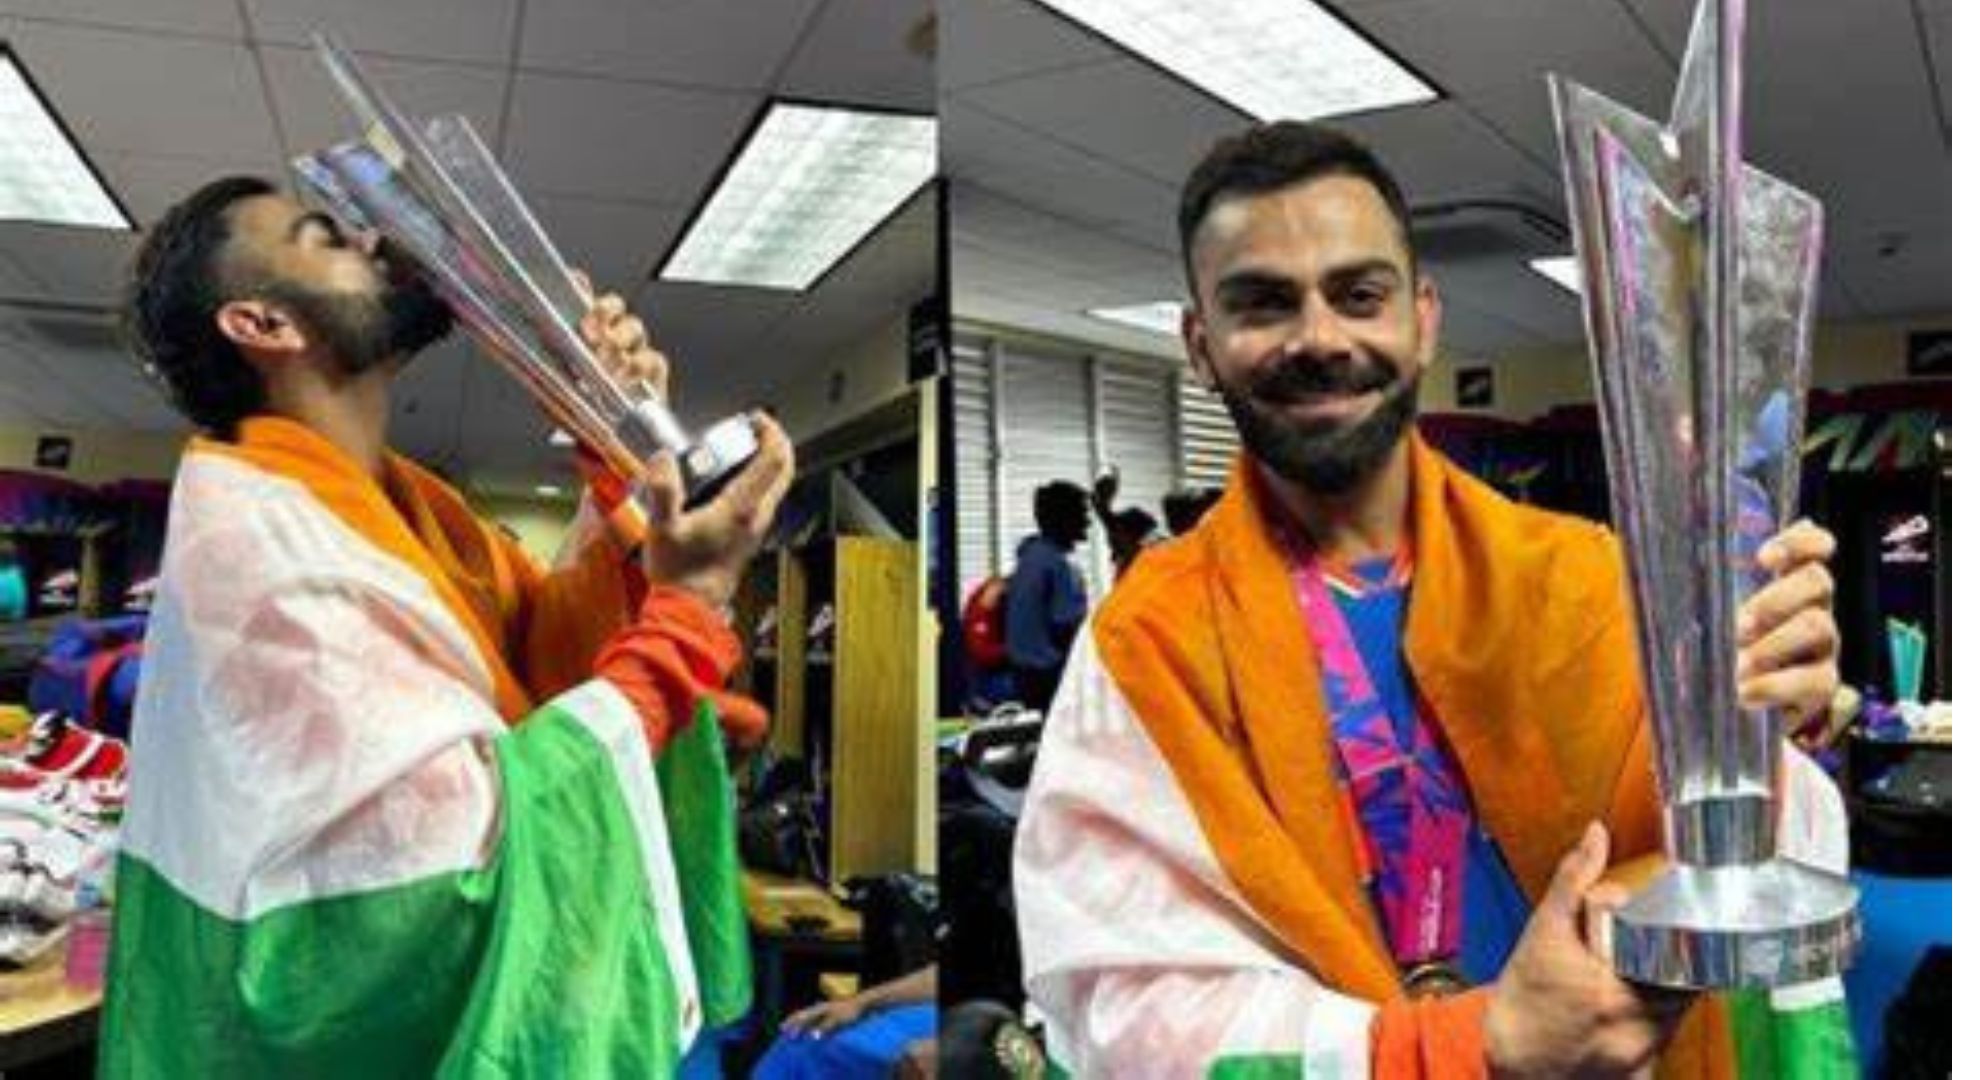 Virat Kohli's Instagram Sets Record After India's T20 World Cup Win